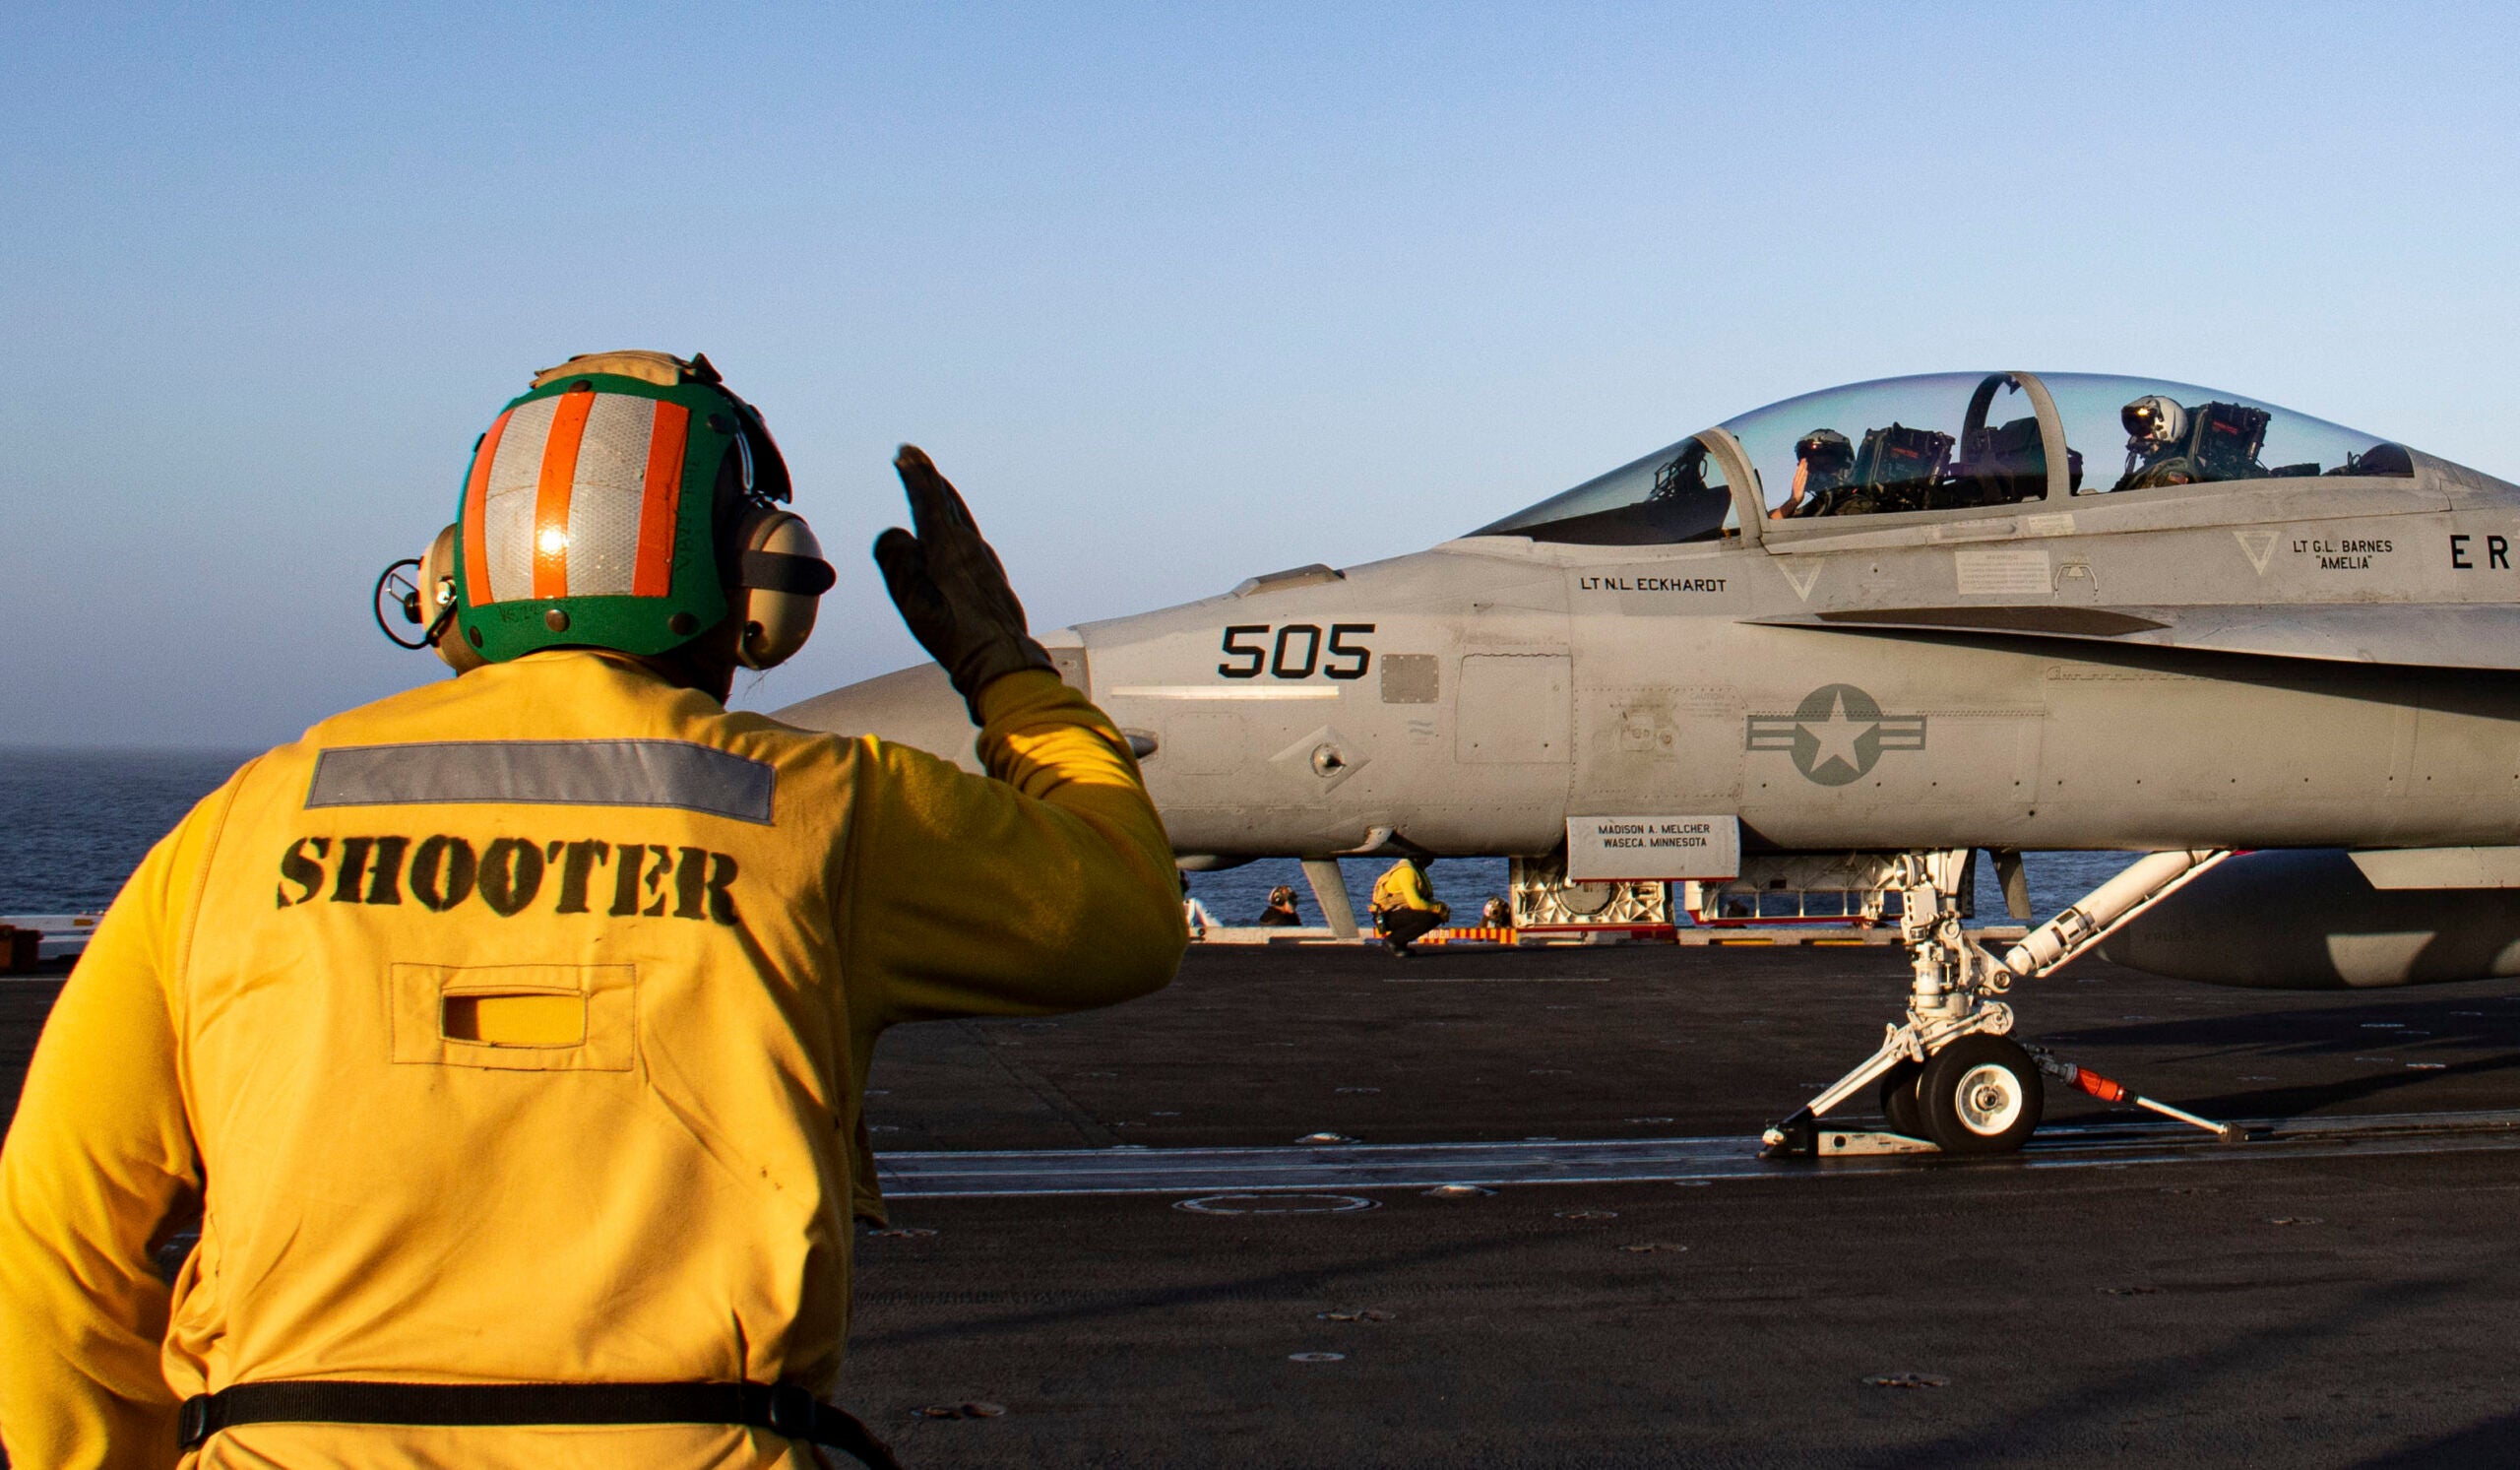 Jet fuel leaked into drinking water aboard Navy aircraft carrier